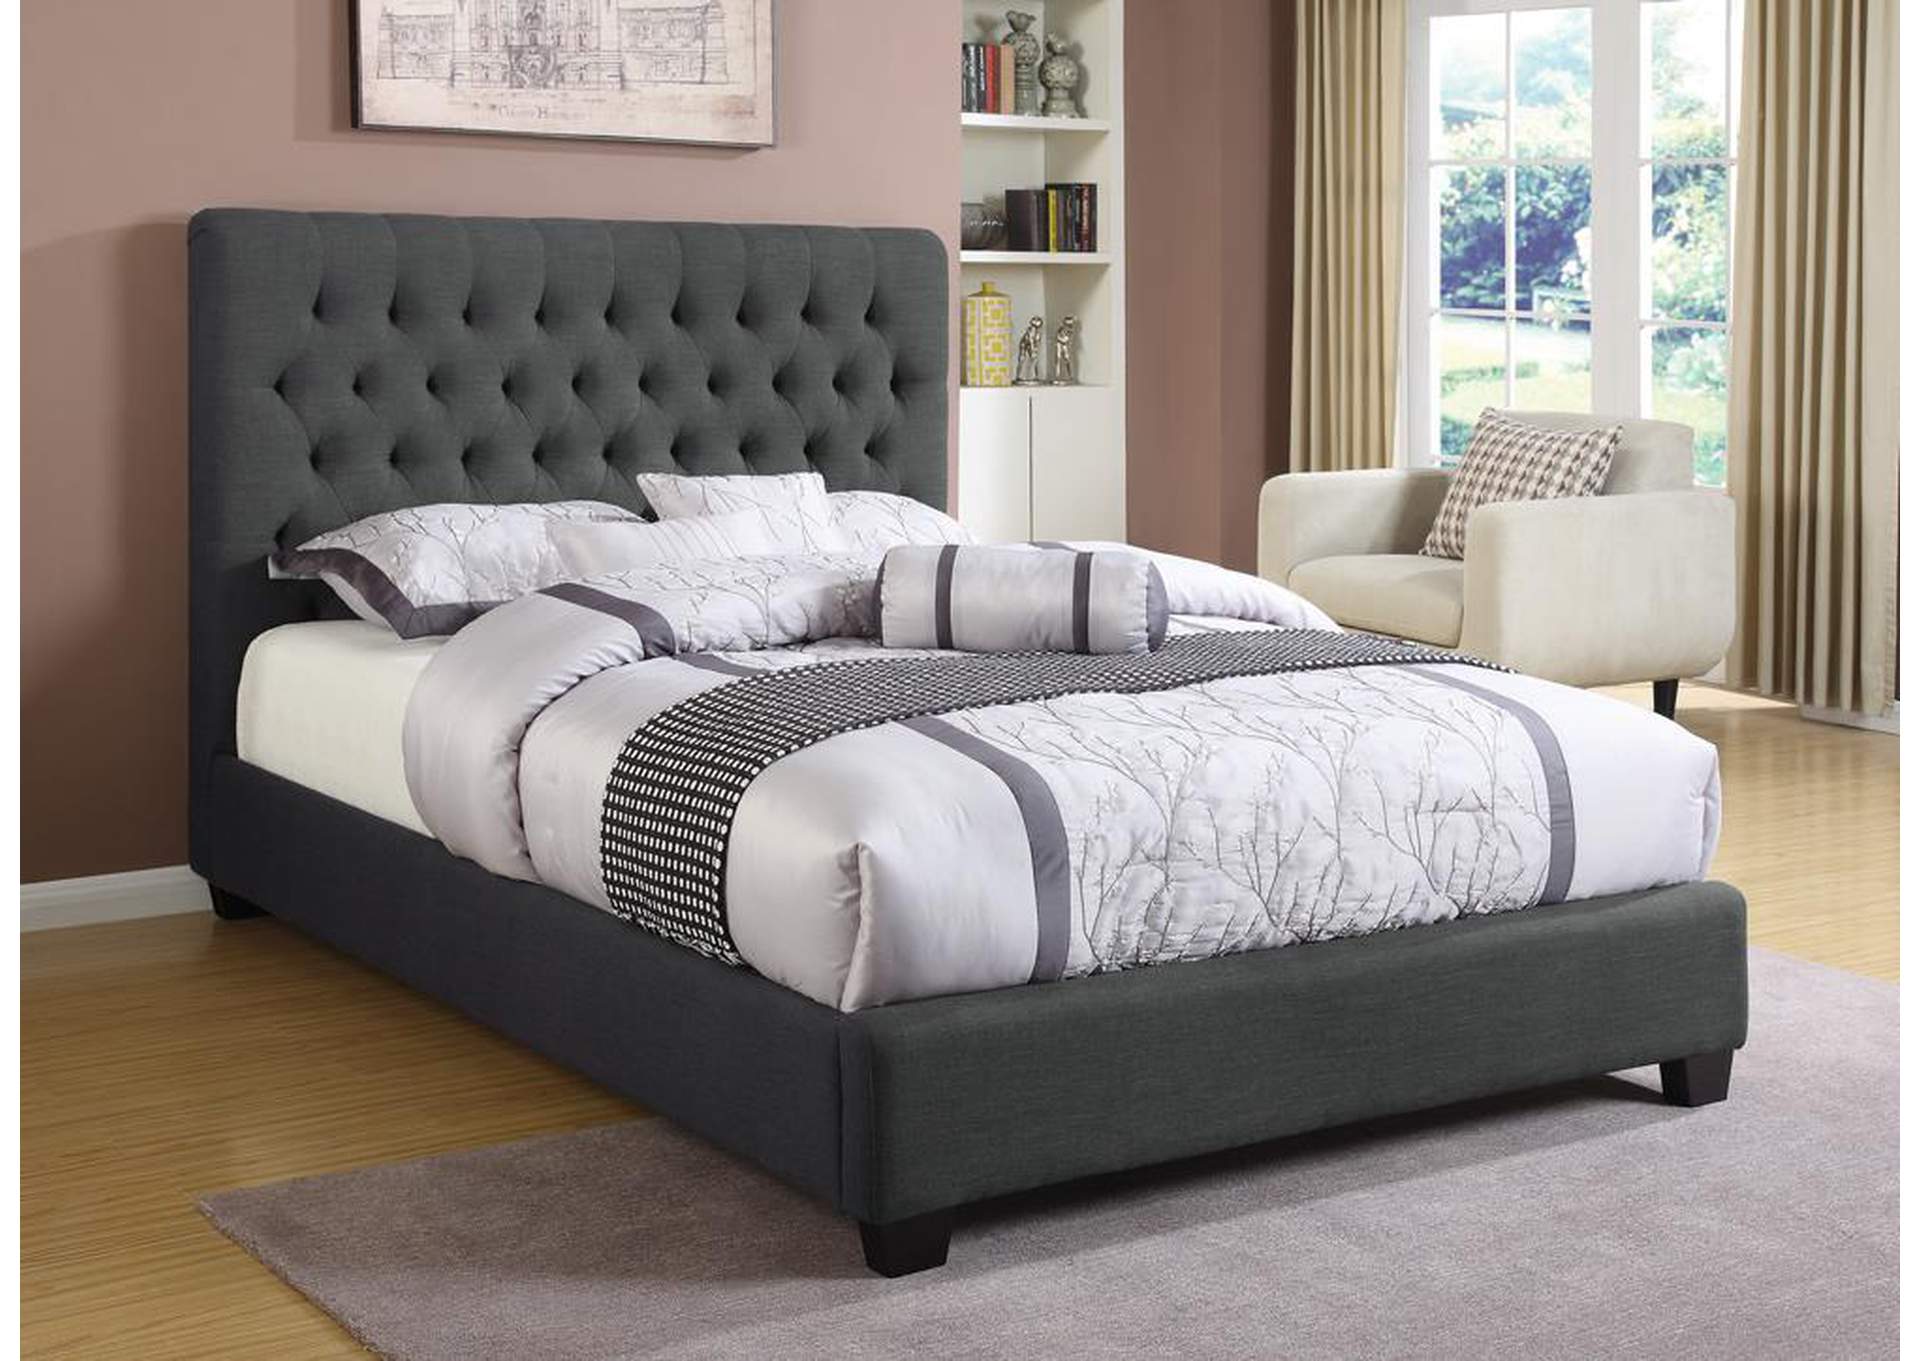 Chloe Transitional Charcoal Upholstered Full Bed,Coaster Furniture